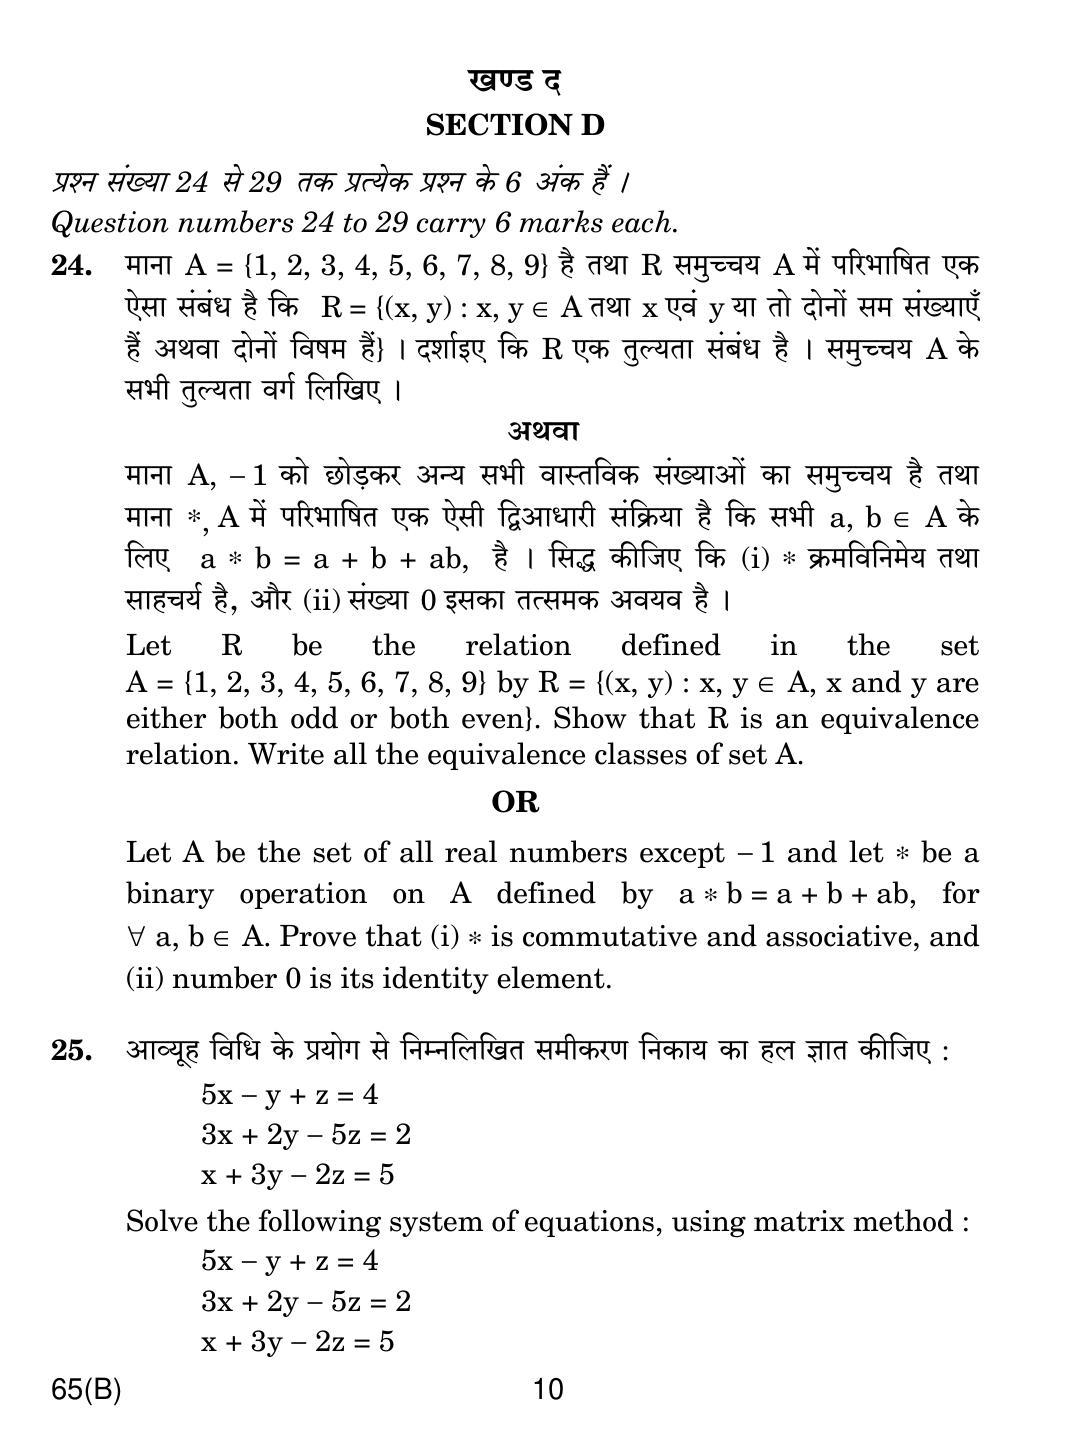 CBSE Class 12 65(B) MATHS FOR BLIND CANDIDATES 2018 Question Paper - Page 10